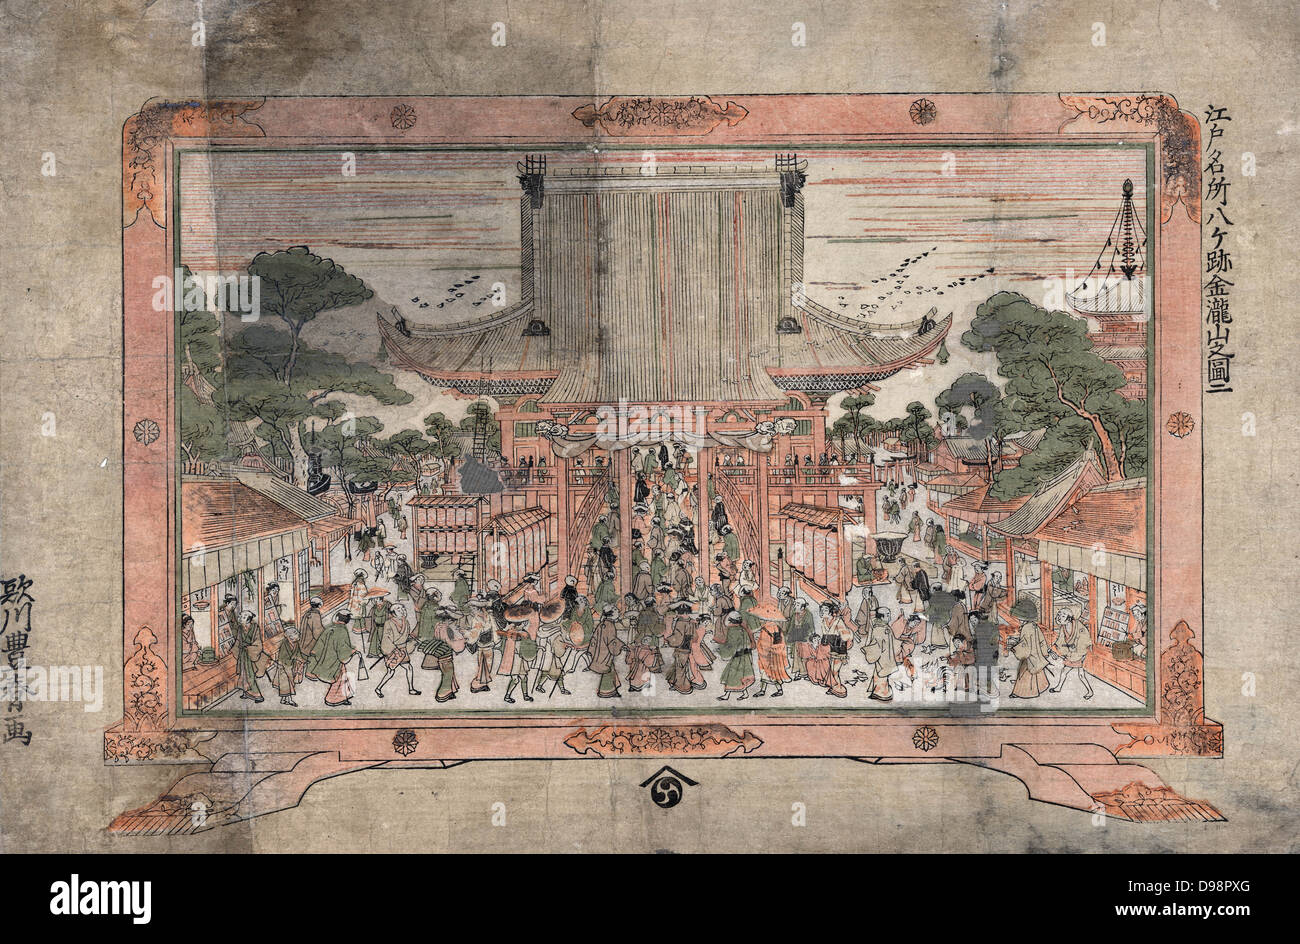 People entering a large temple. Outside are trading stalls. Print of a painting in a frame with feet, c1770. Utagawa Toyoharu (1735-1814) Japanese Ukiyo-e artist. Crowd Religion Worship Stock Photo